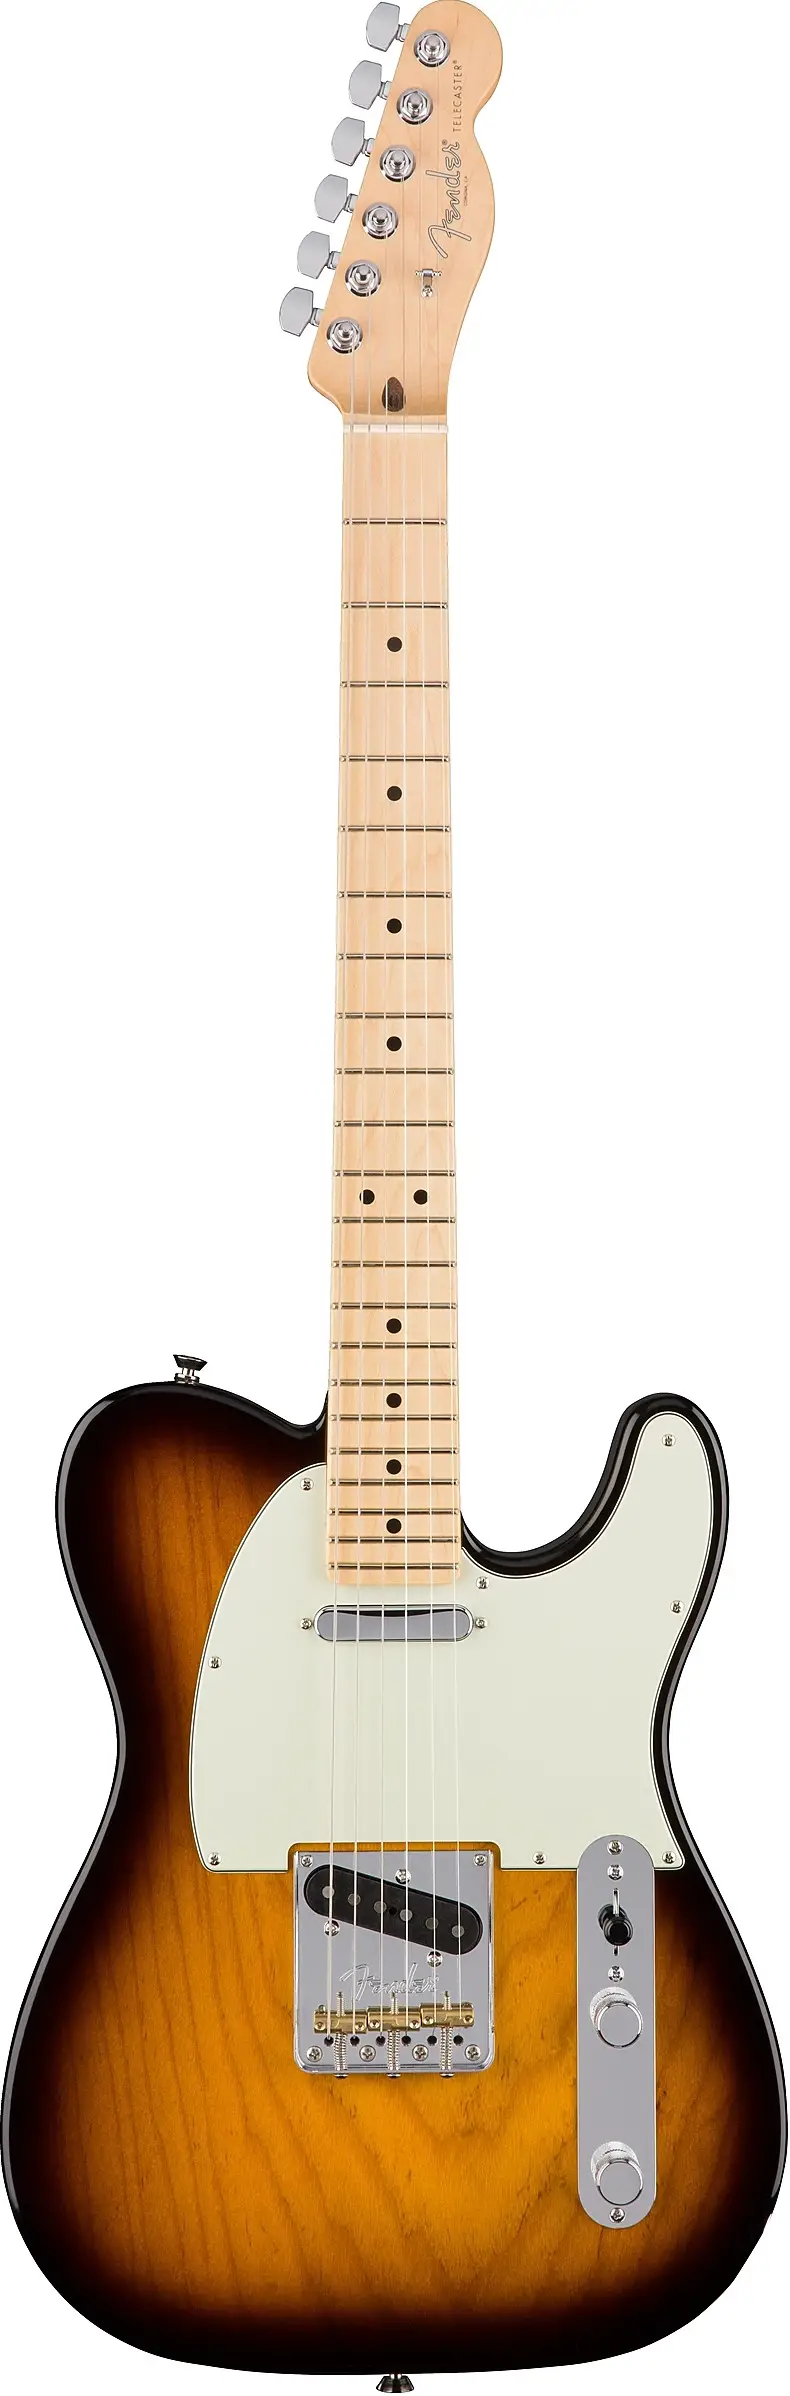 American Professional Telecaster by Fender